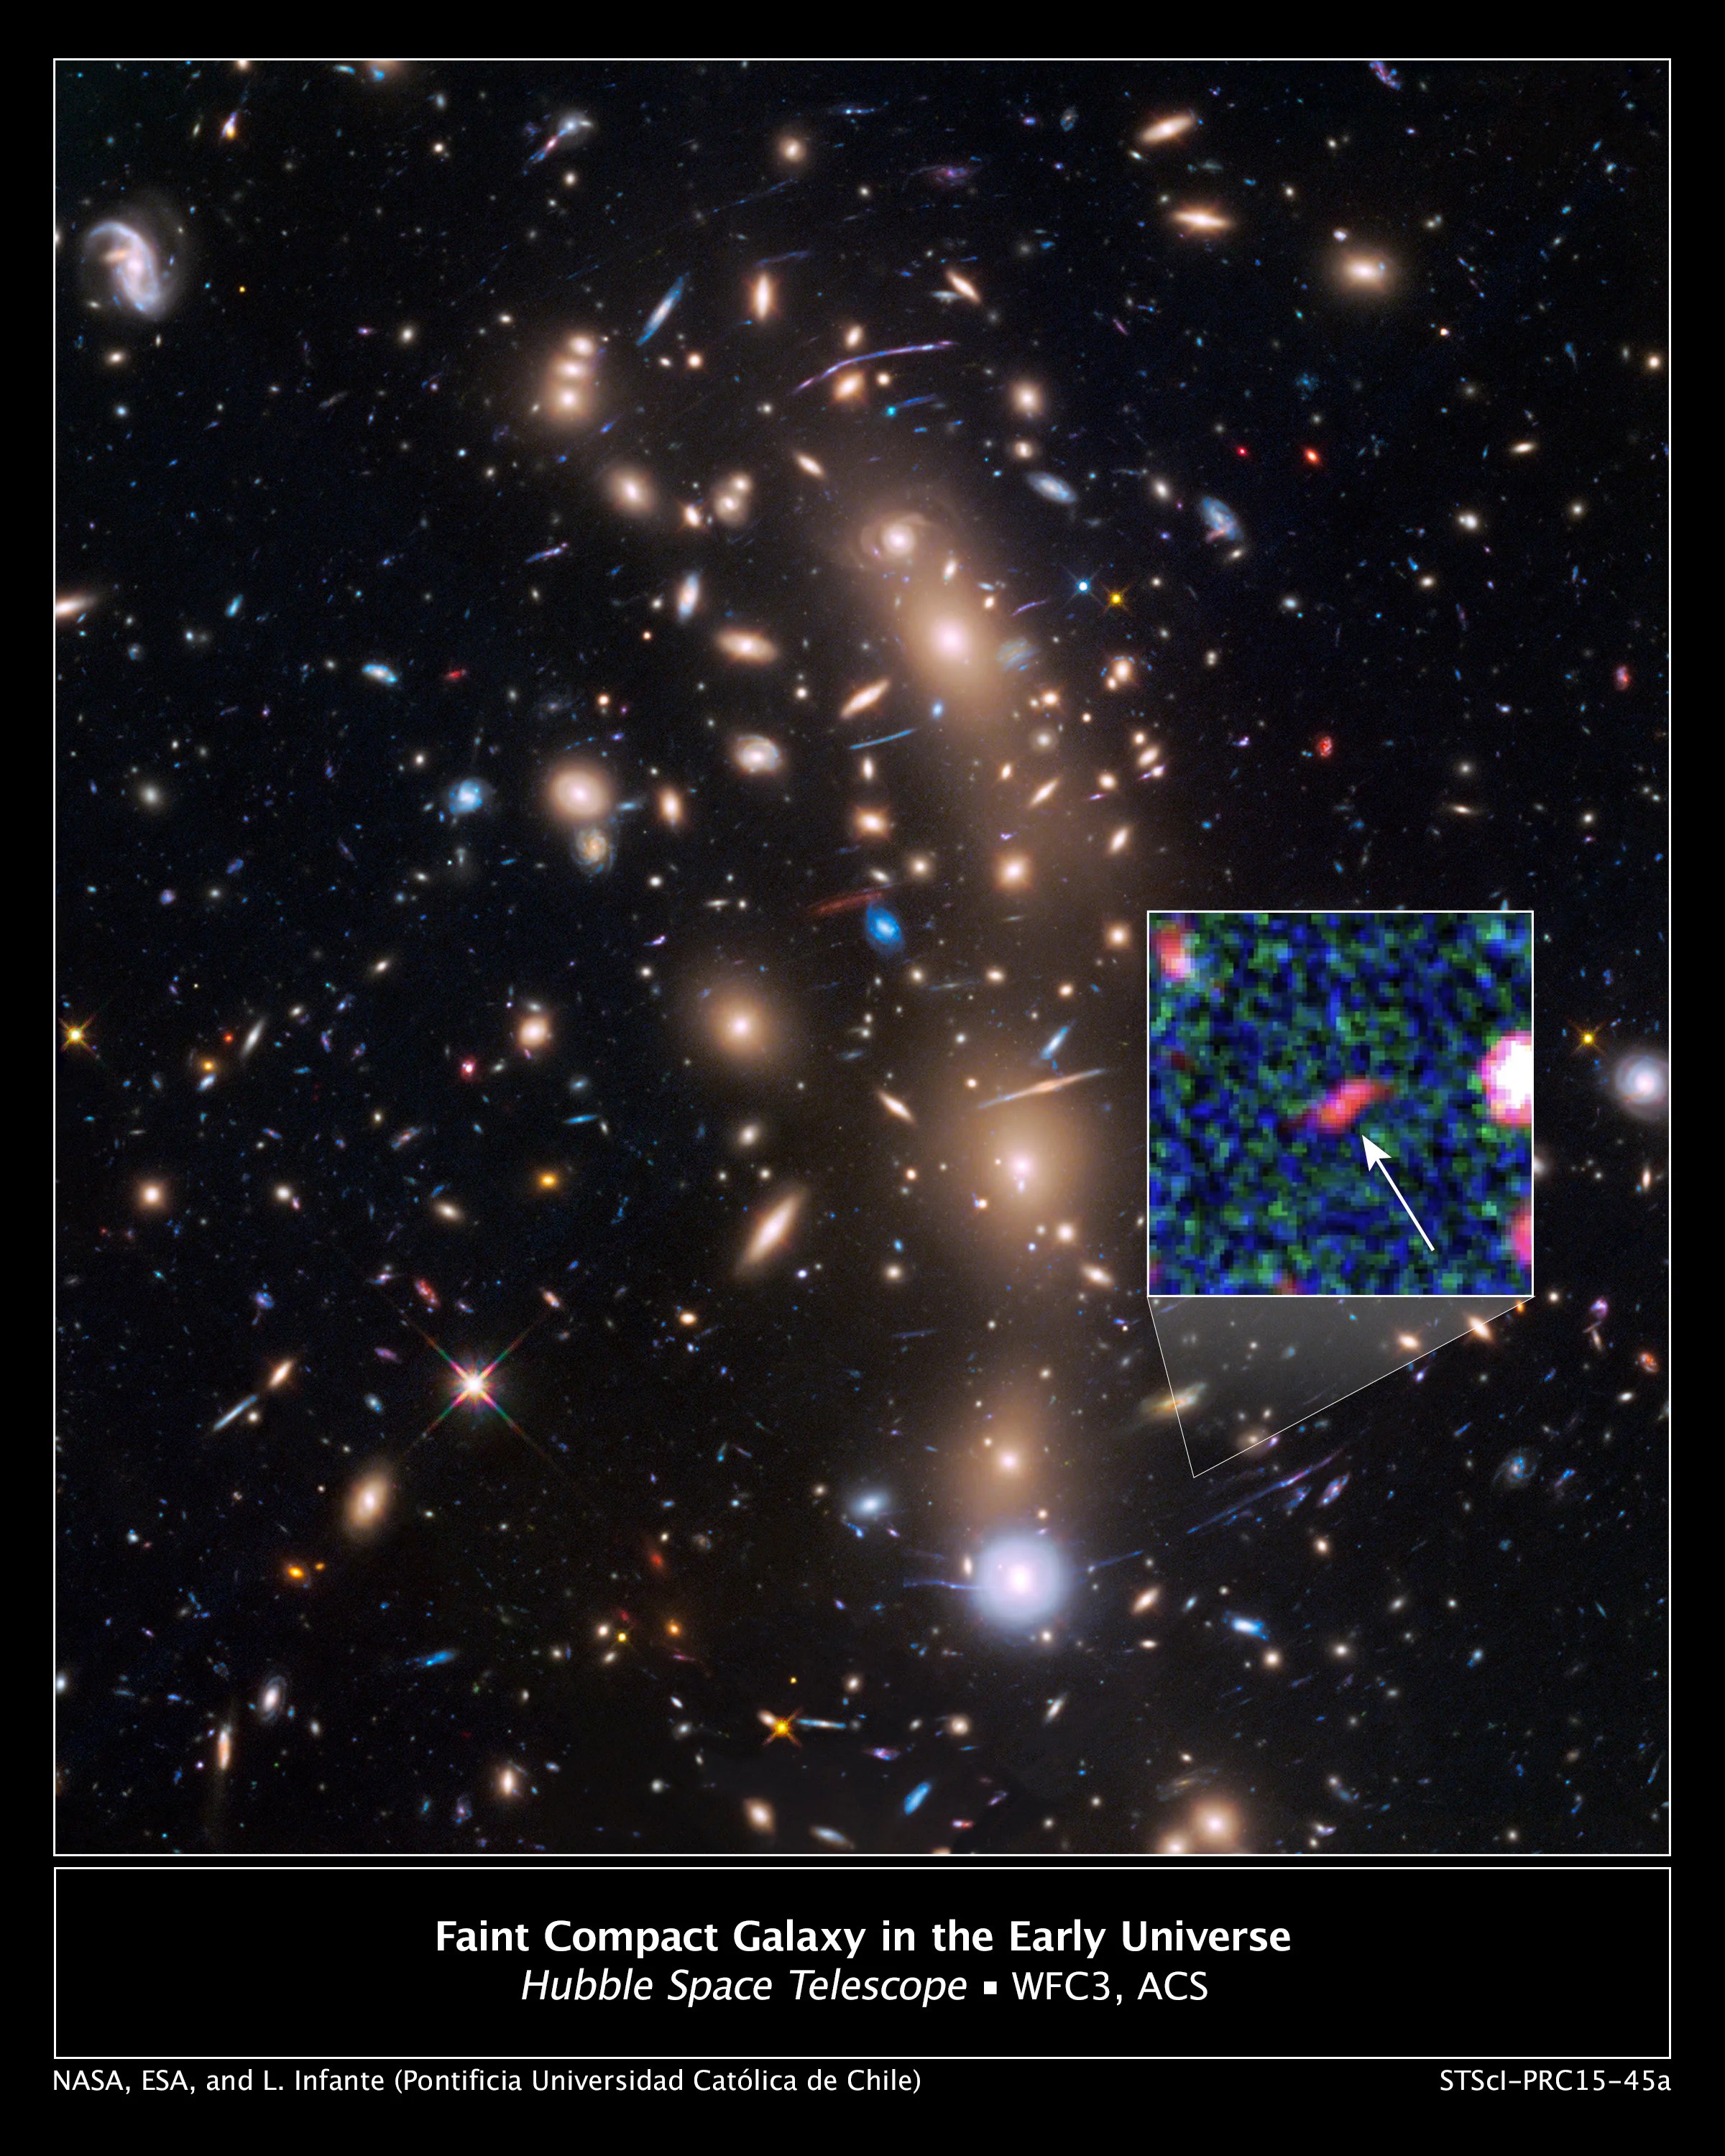 Hubble image of a lensing galaxy cluster, showing a vast number of galaxies mostly concentrated in the center of the image on a north-south axis. Streaks in the image are lensed galaxies much further away than the cluster. An inset image of a blurry red object indicates the location of the faintest galaxy.